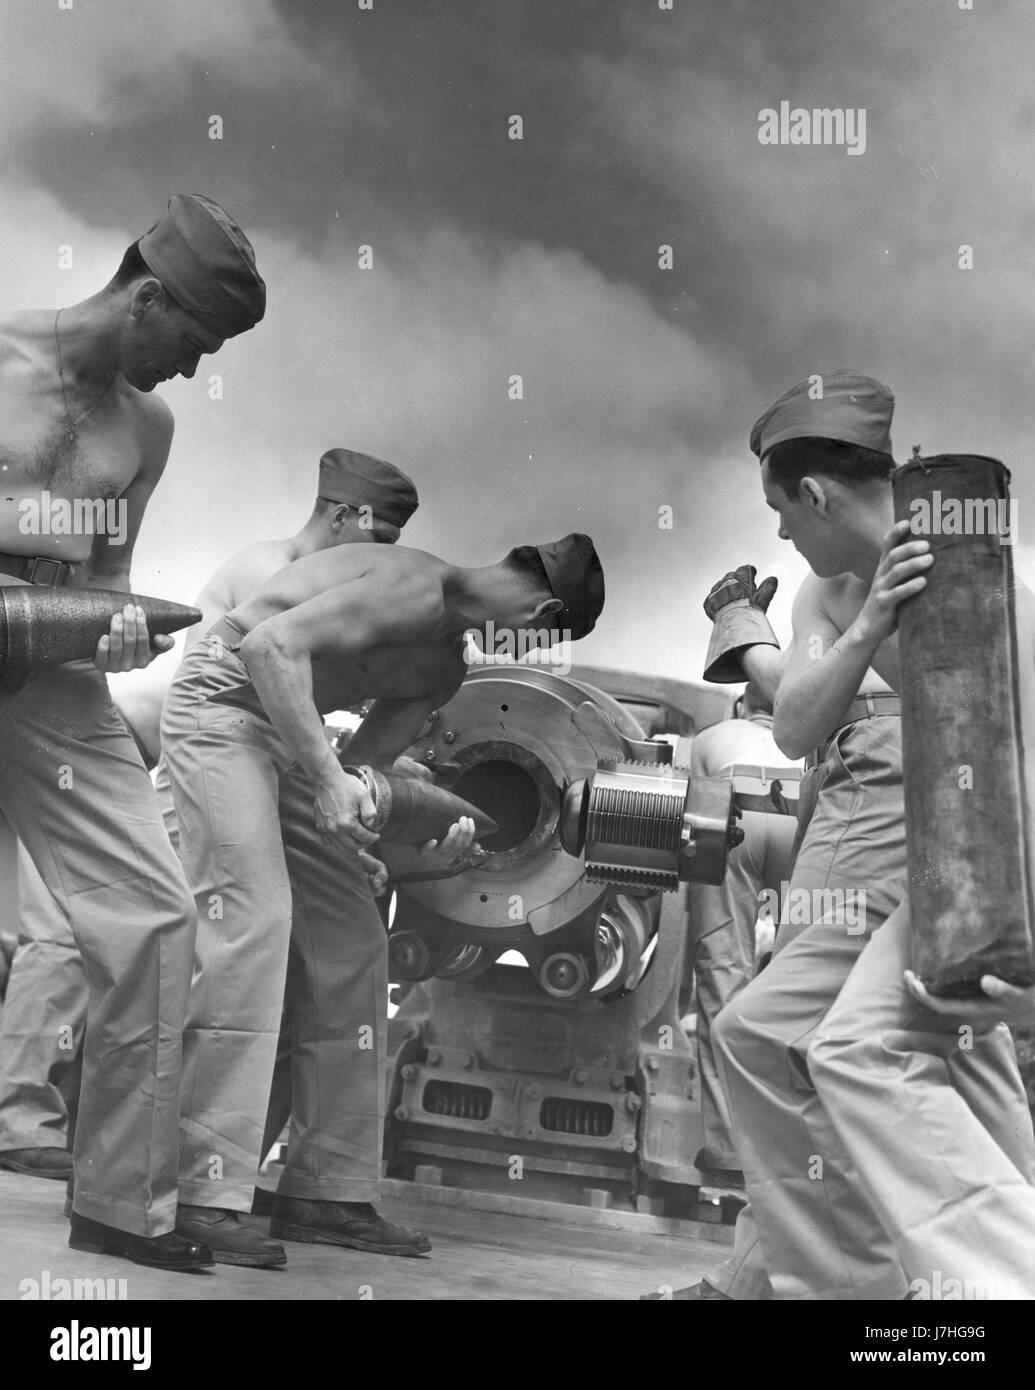 WW II - 'Ready One' - US Marines in Sea School practice loading and firing a 5-inch gun on a ship.  A 5-inch gun is a mounted weapon that has a 5' bore, which is the inside diameter of the barrel.   To see my related vintage images, Search:  Prestor  vintage  weapon  WW II Stock Photo